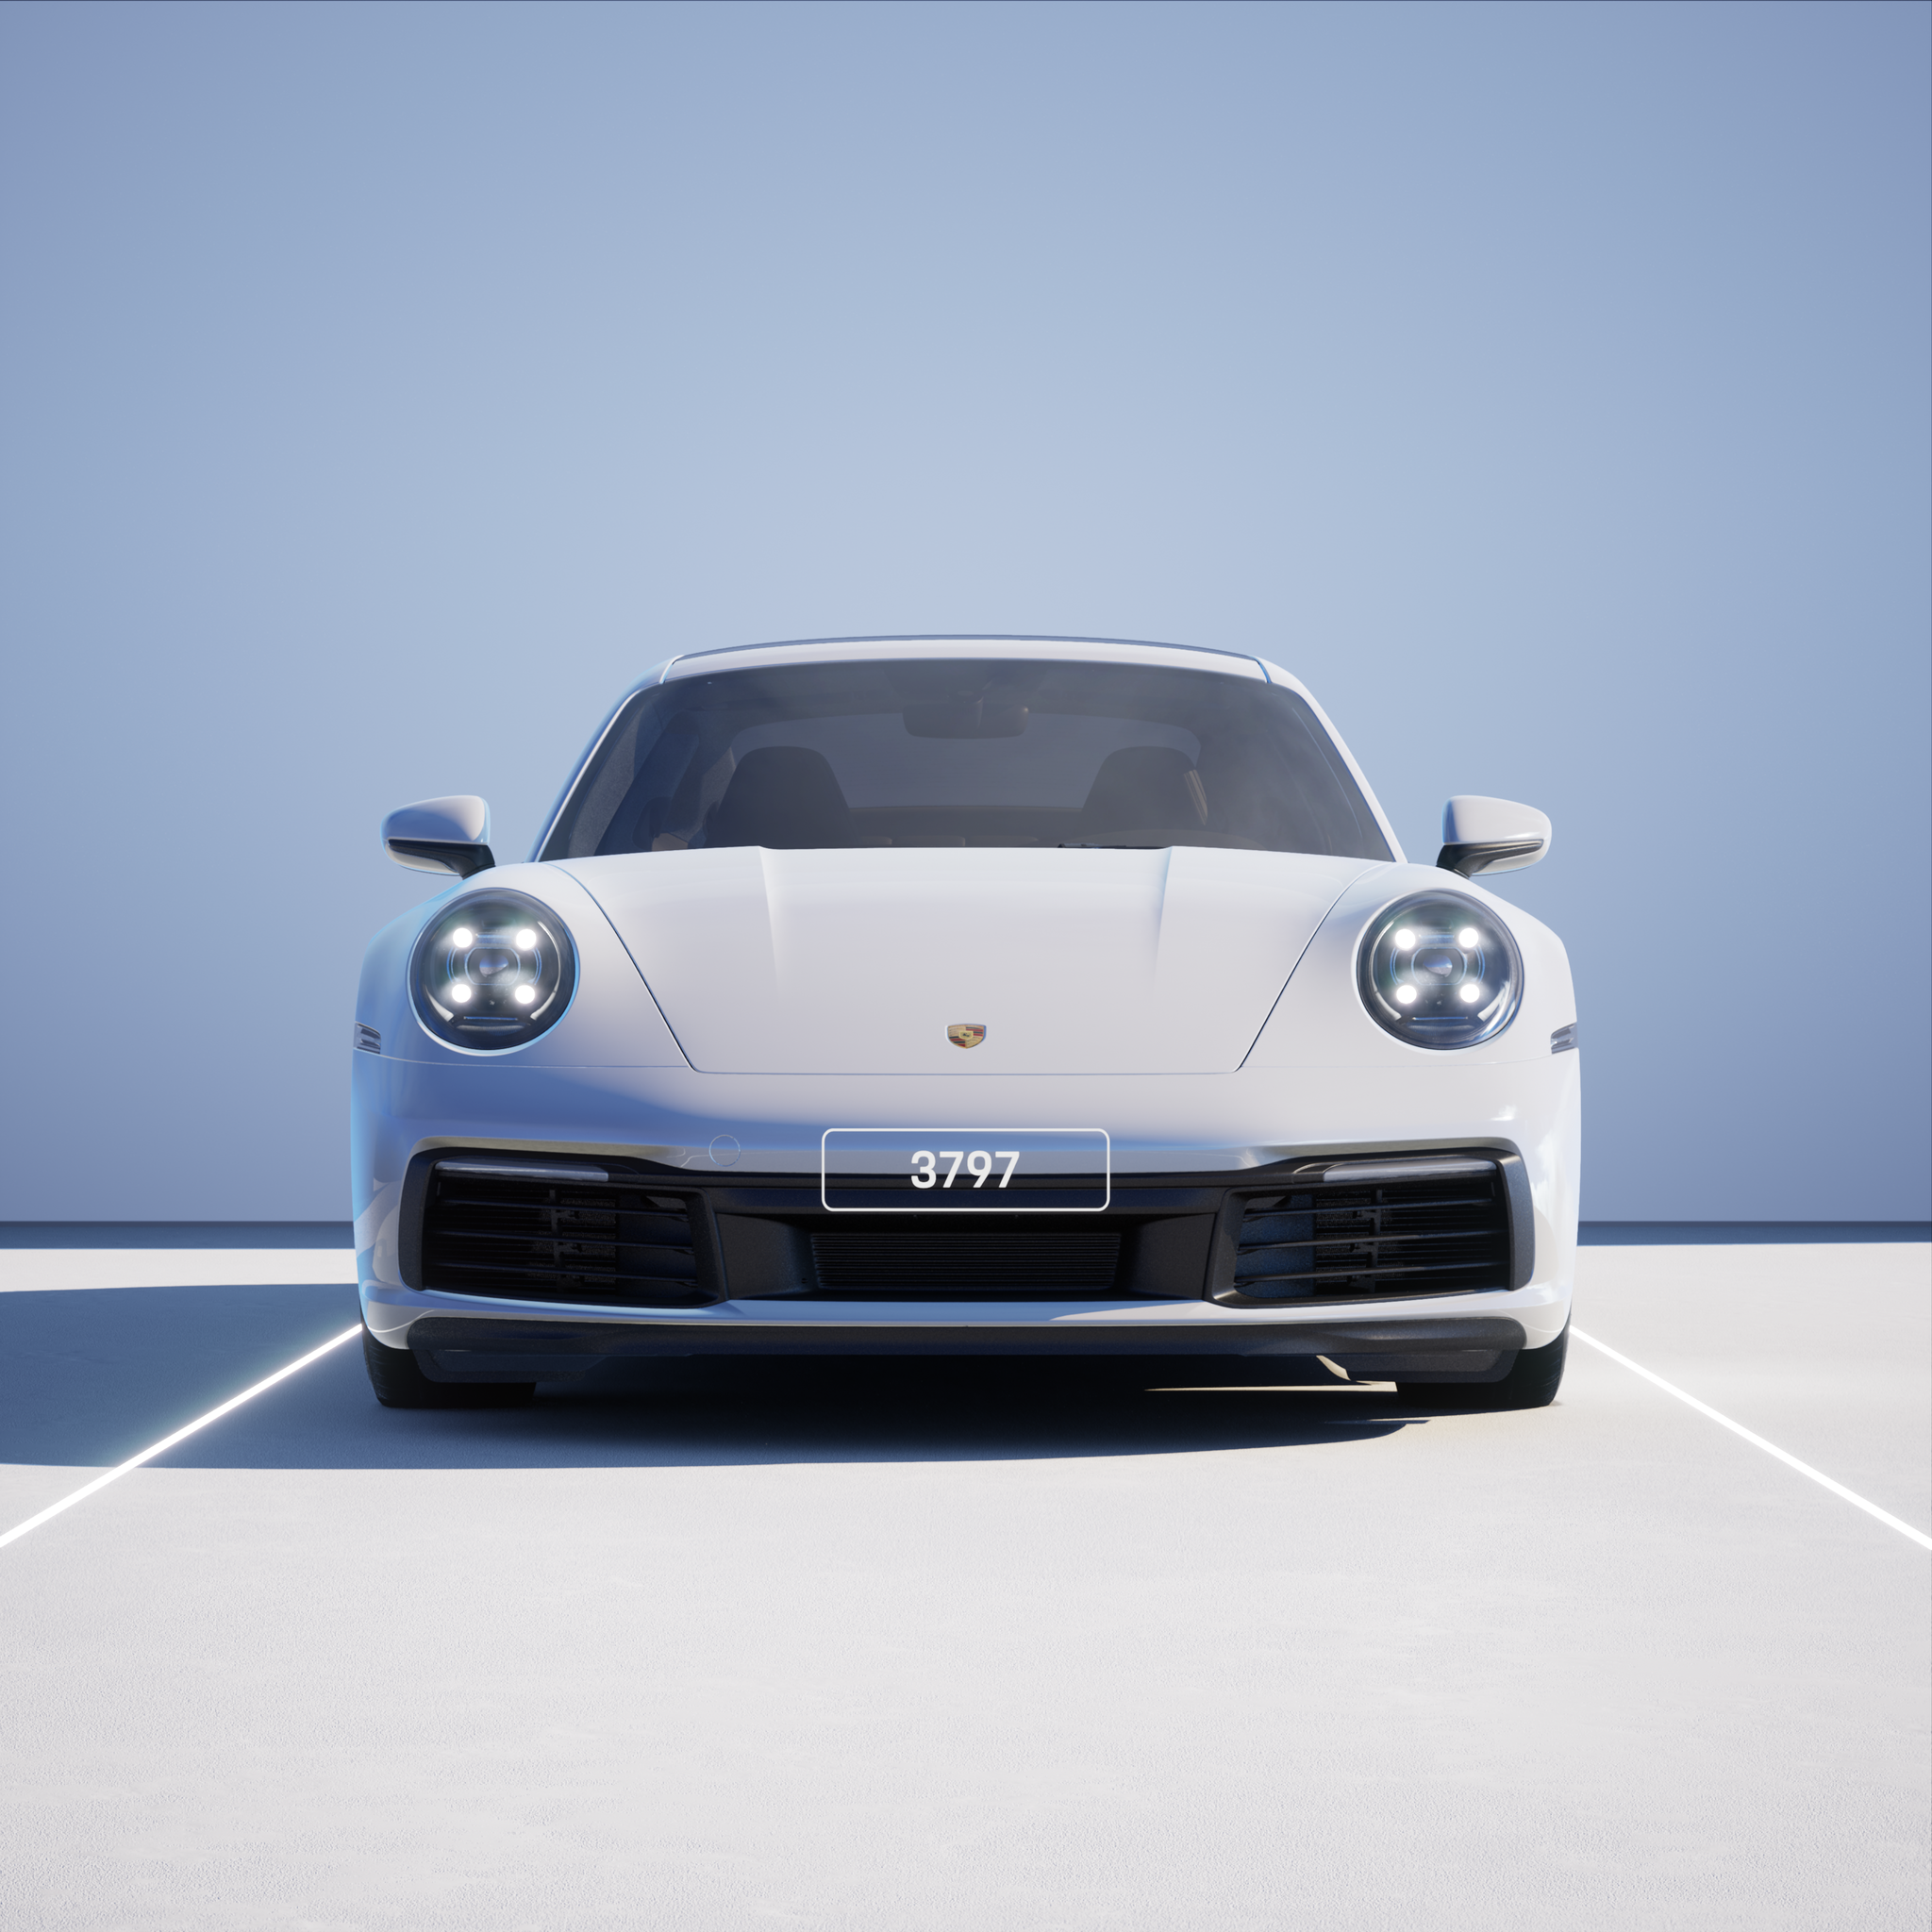 The PORSCHΞ 911 3797 image in phase